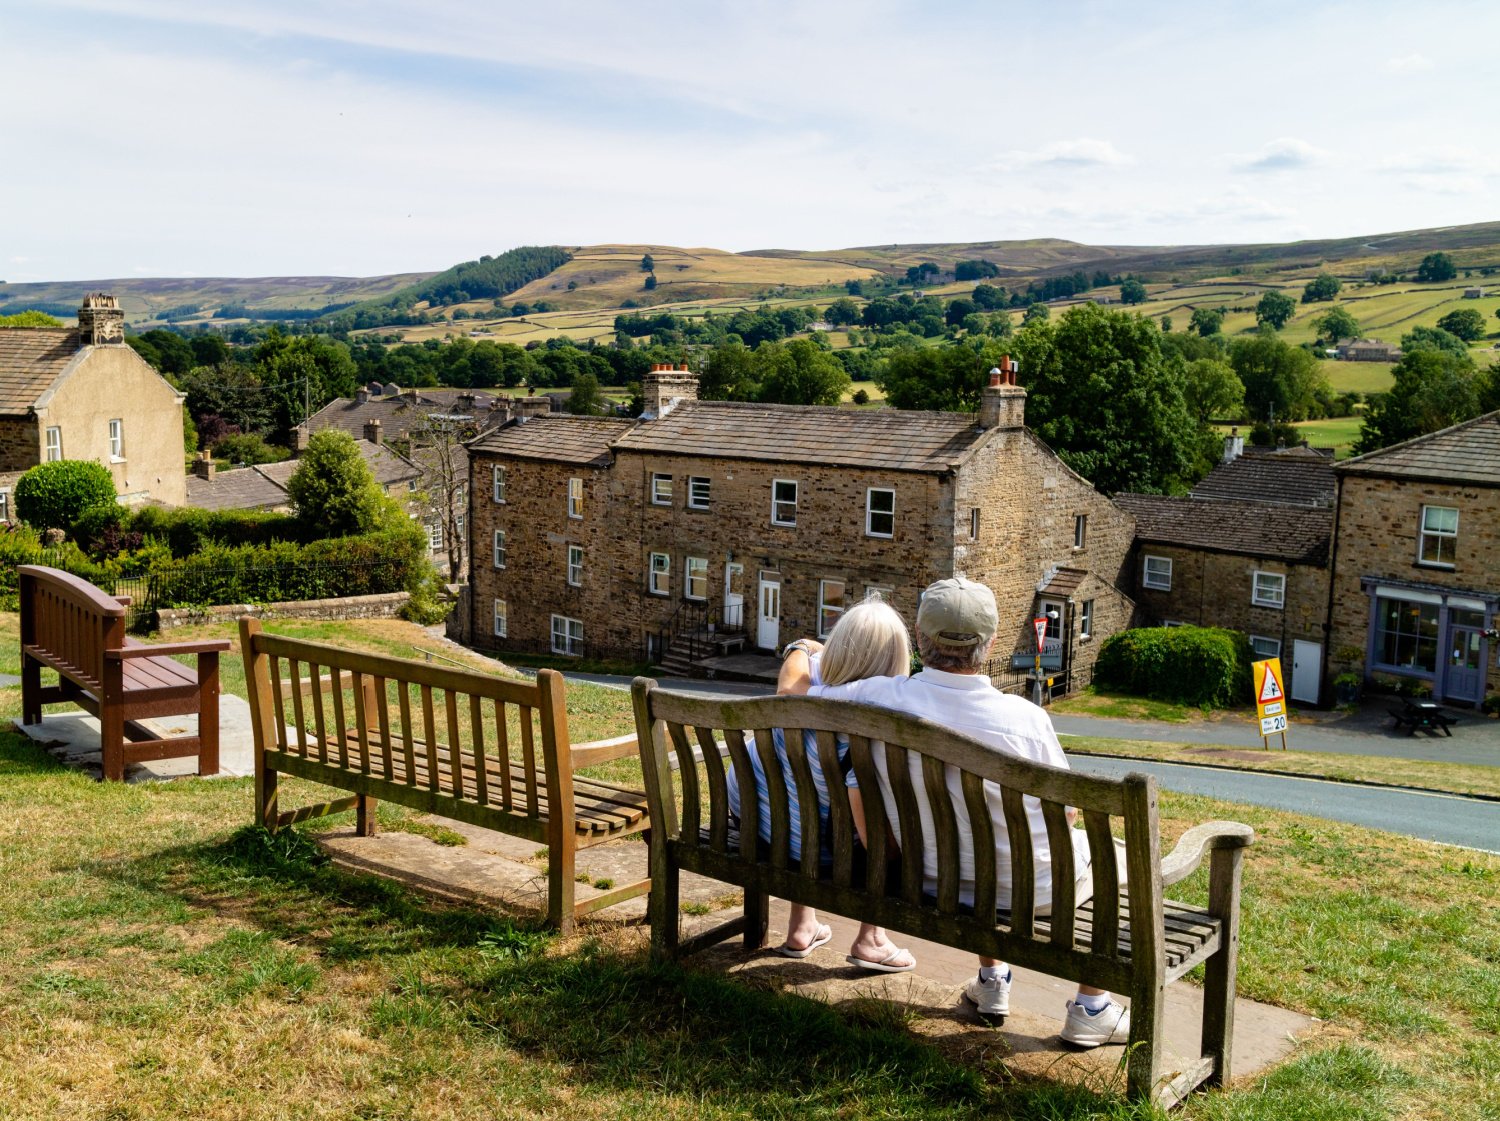 Image name elderly couple bench yorkshire the 12 image from the post Romantic Valentine's Getaways in Yorkshire: From Magical Proposals to Cosy Stays in Yorkshire.com.